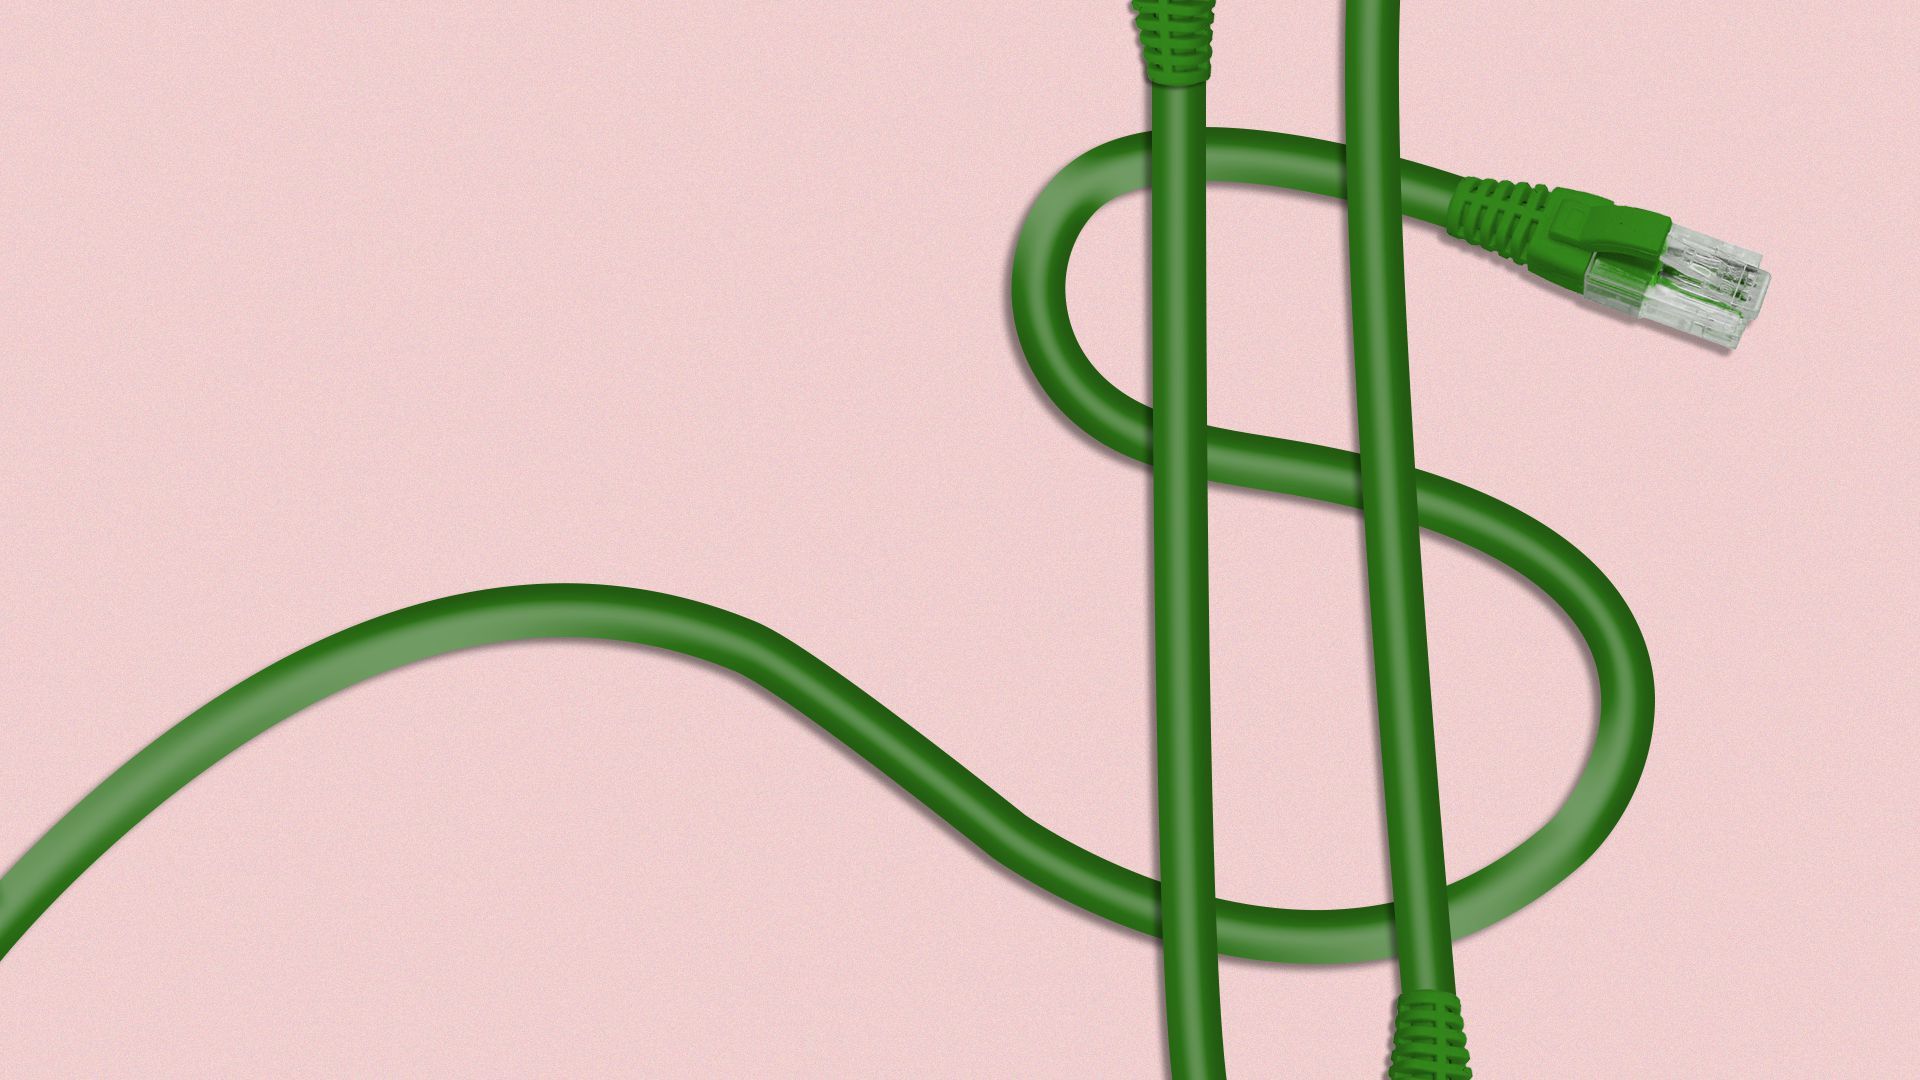 Illustration of ethernet cables forming a dollar sign.